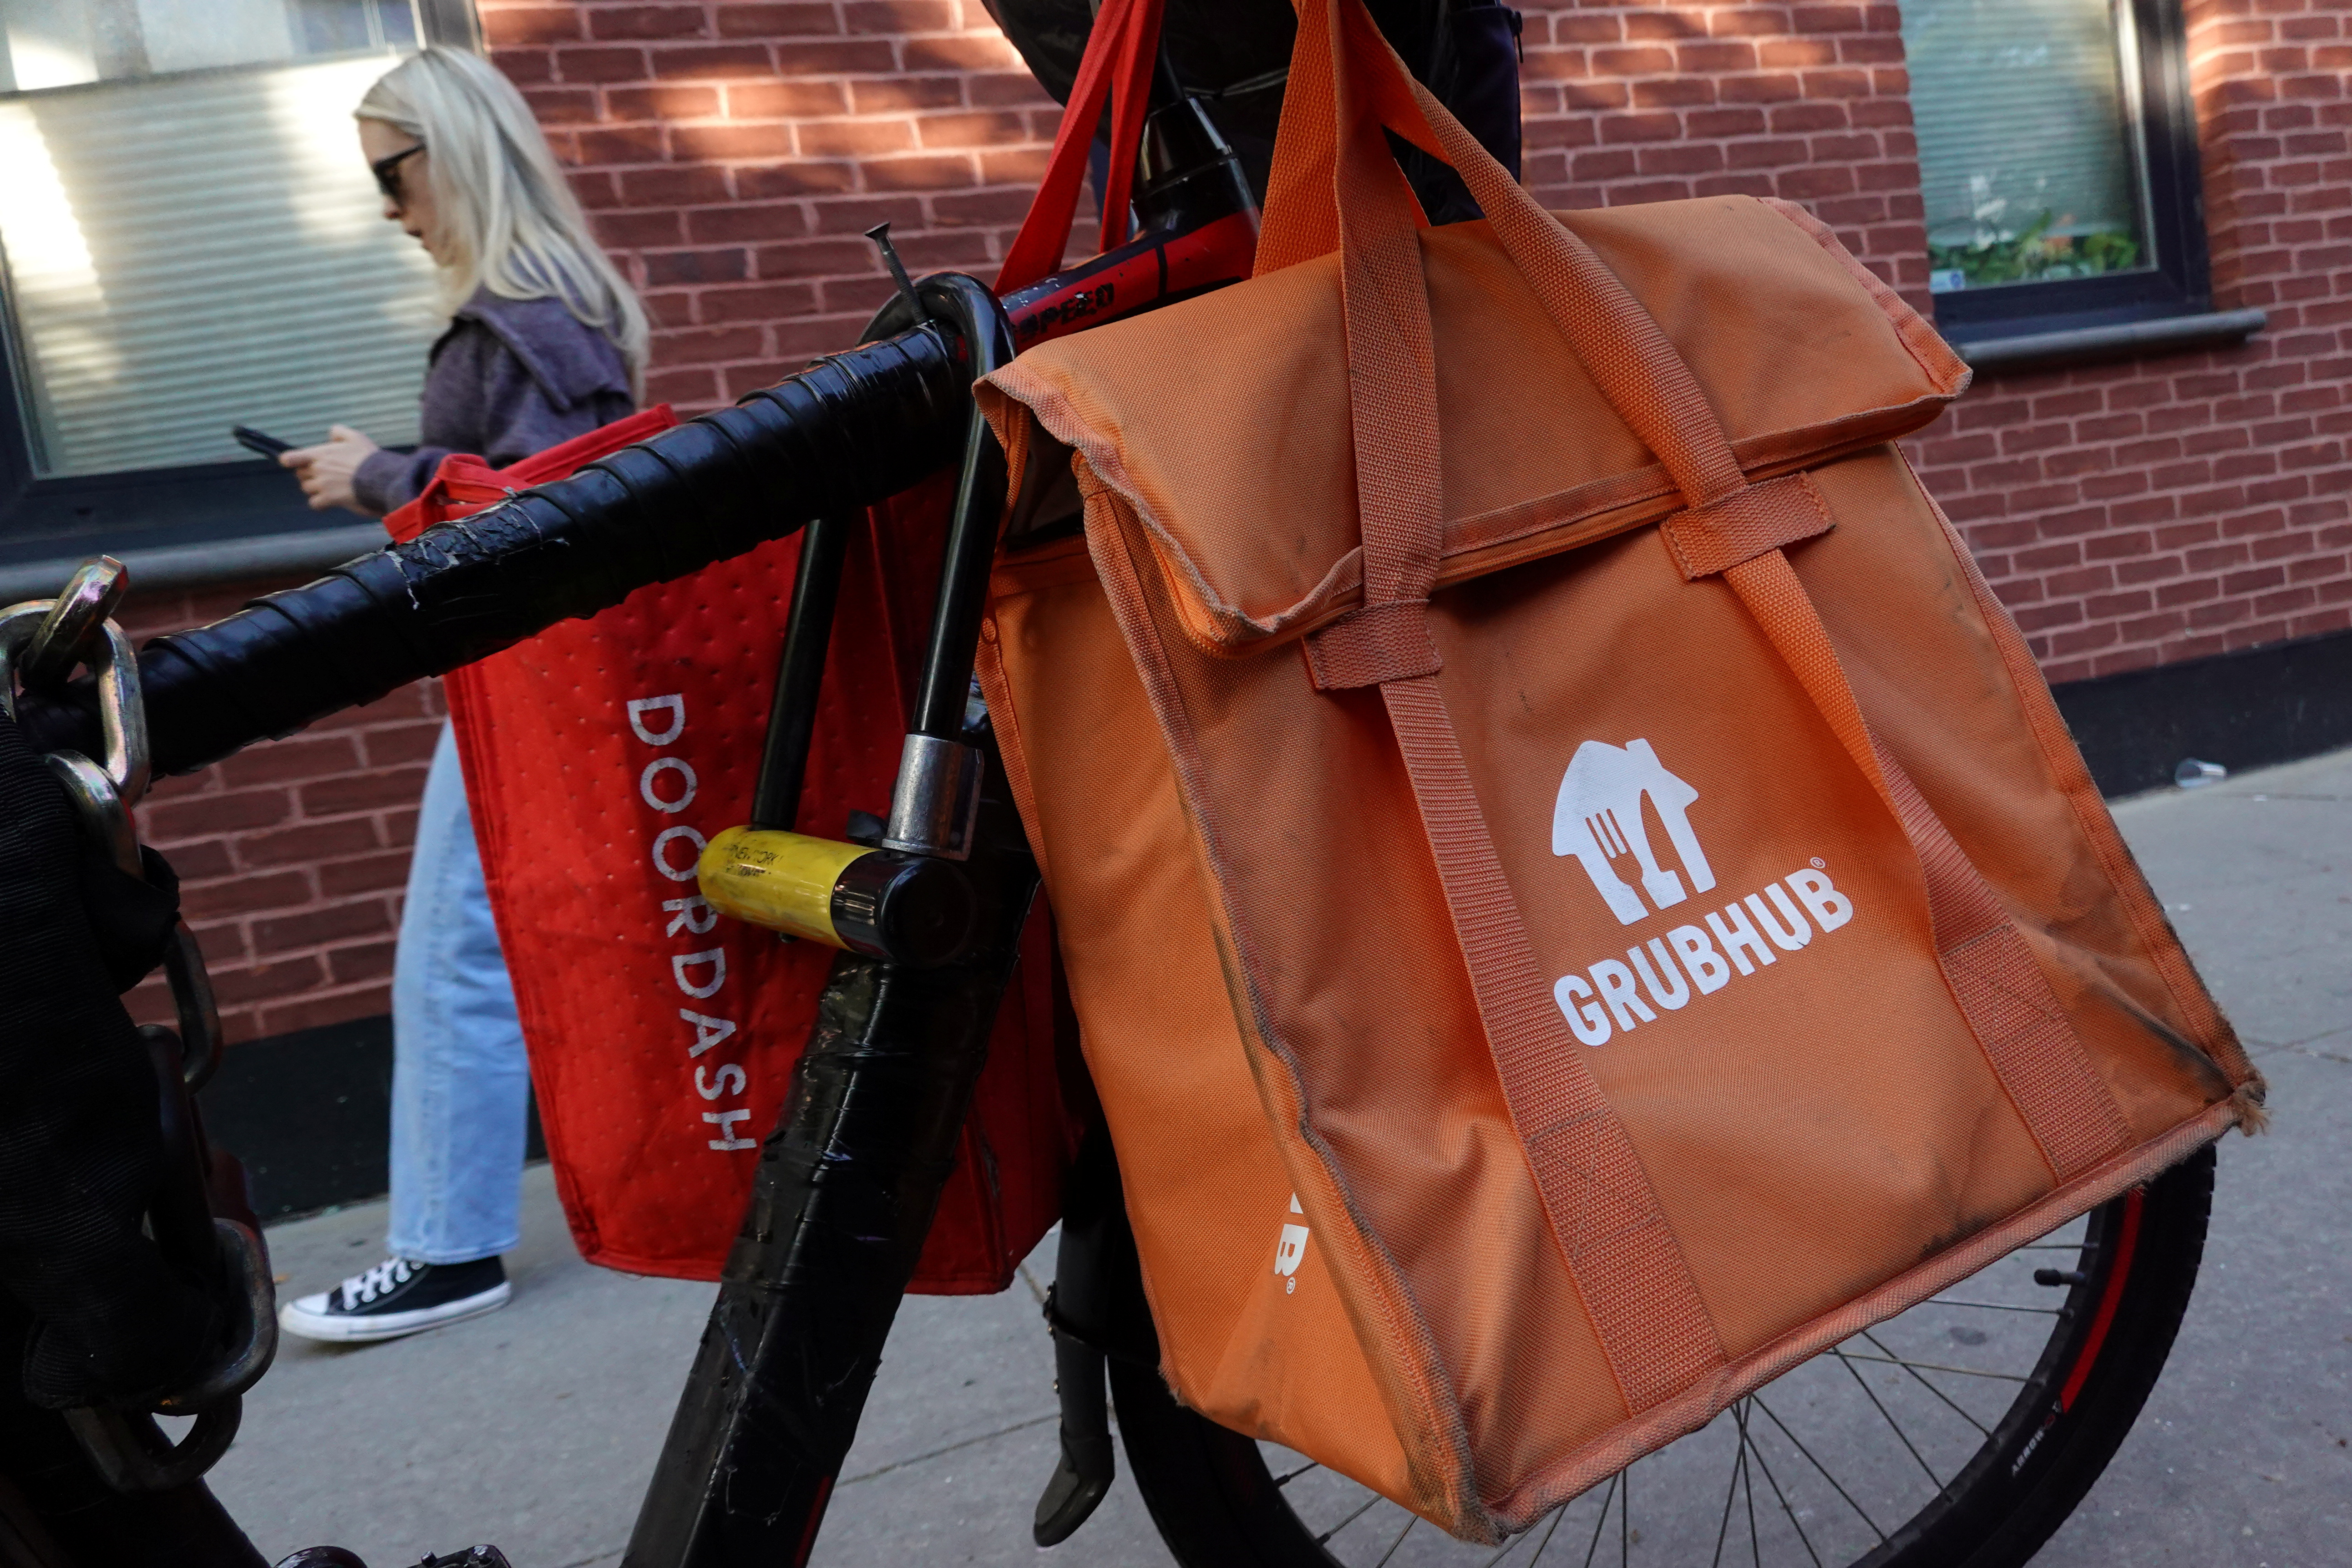 Doordash and Grubhub delivery bags are seen on a bicycle in Brooklyn, New York City